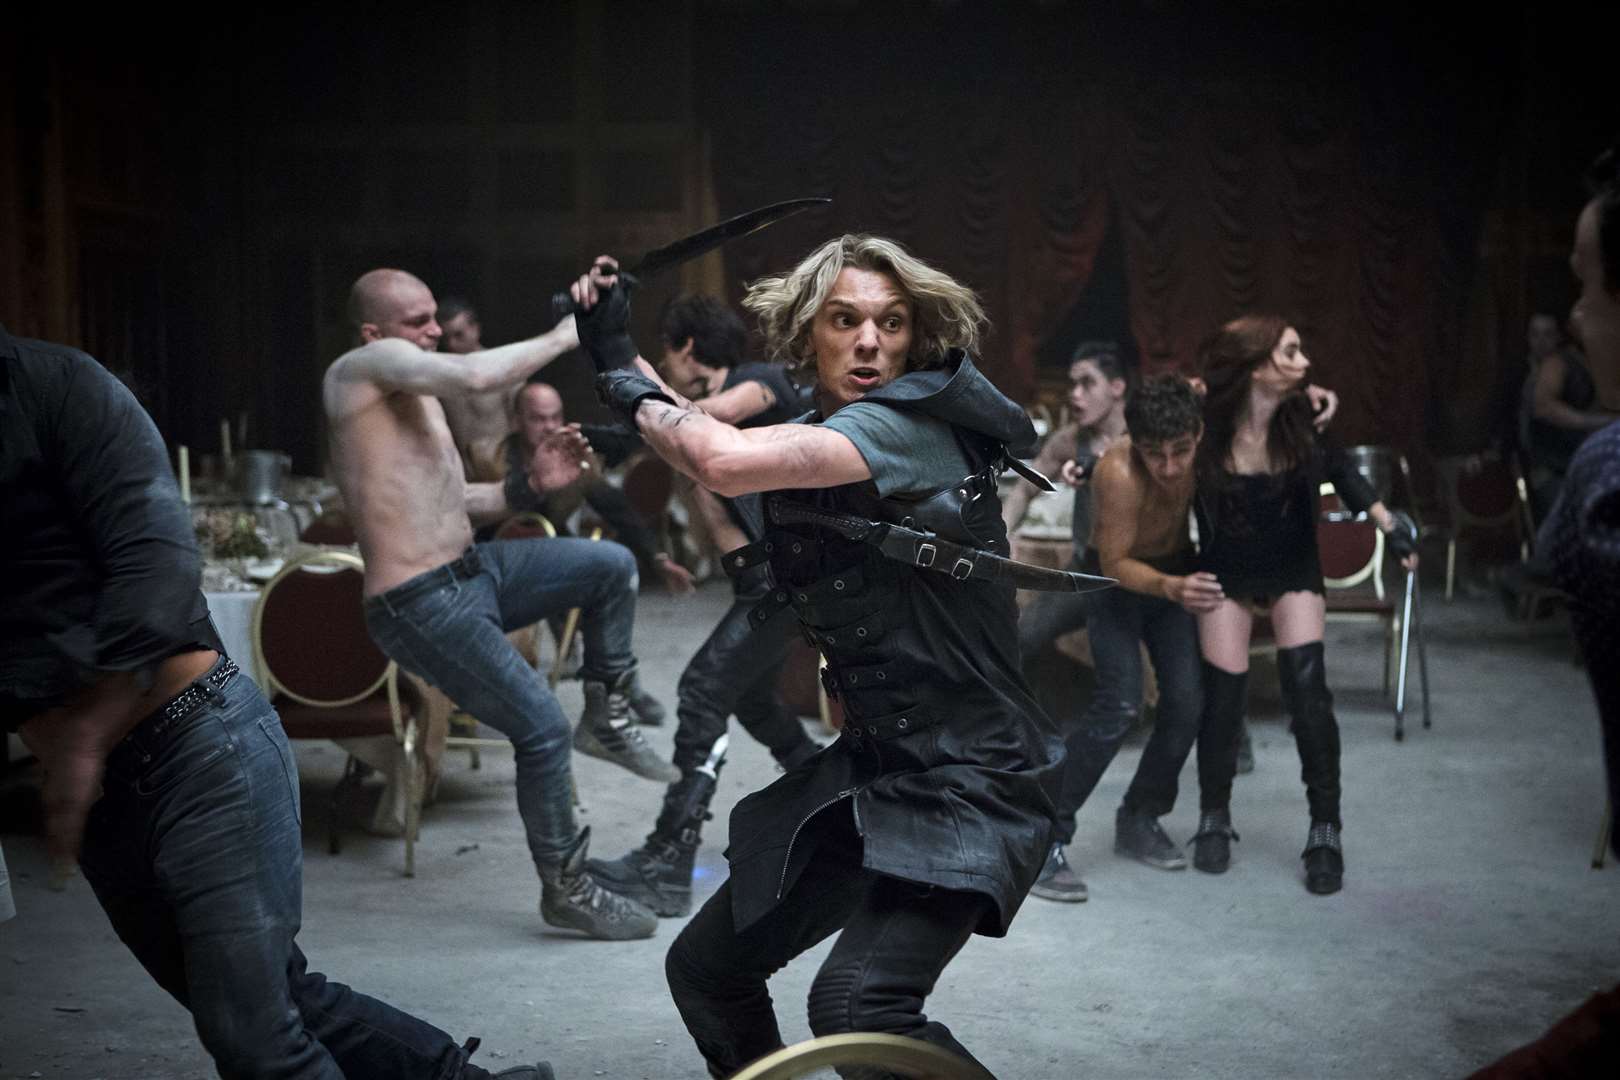 The Moral Instruments: City Of Bones with Lily Collins as Clary, Robert Sheehan as Simon, Jamie Campbell Bower as Jace and Kevin Zegers as Alec. Picture: PA Photo/Entertainment One.